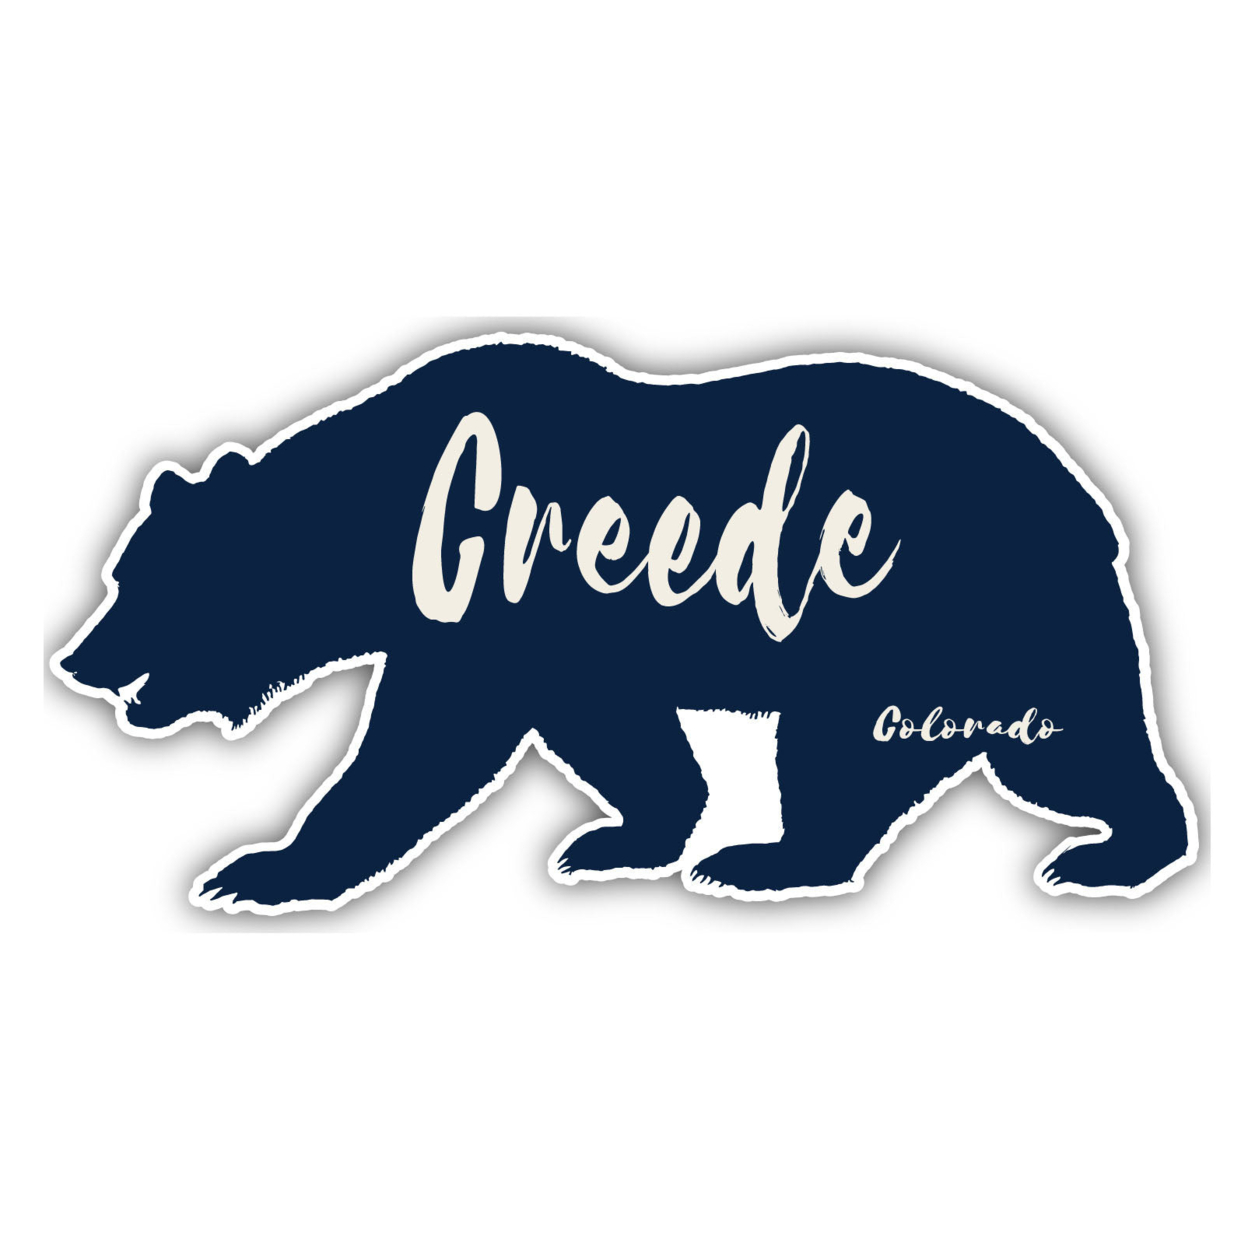 Creede Colorado Souvenir Decorative Stickers (Choose Theme And Size) - 4-Pack, 10-Inch, Tent